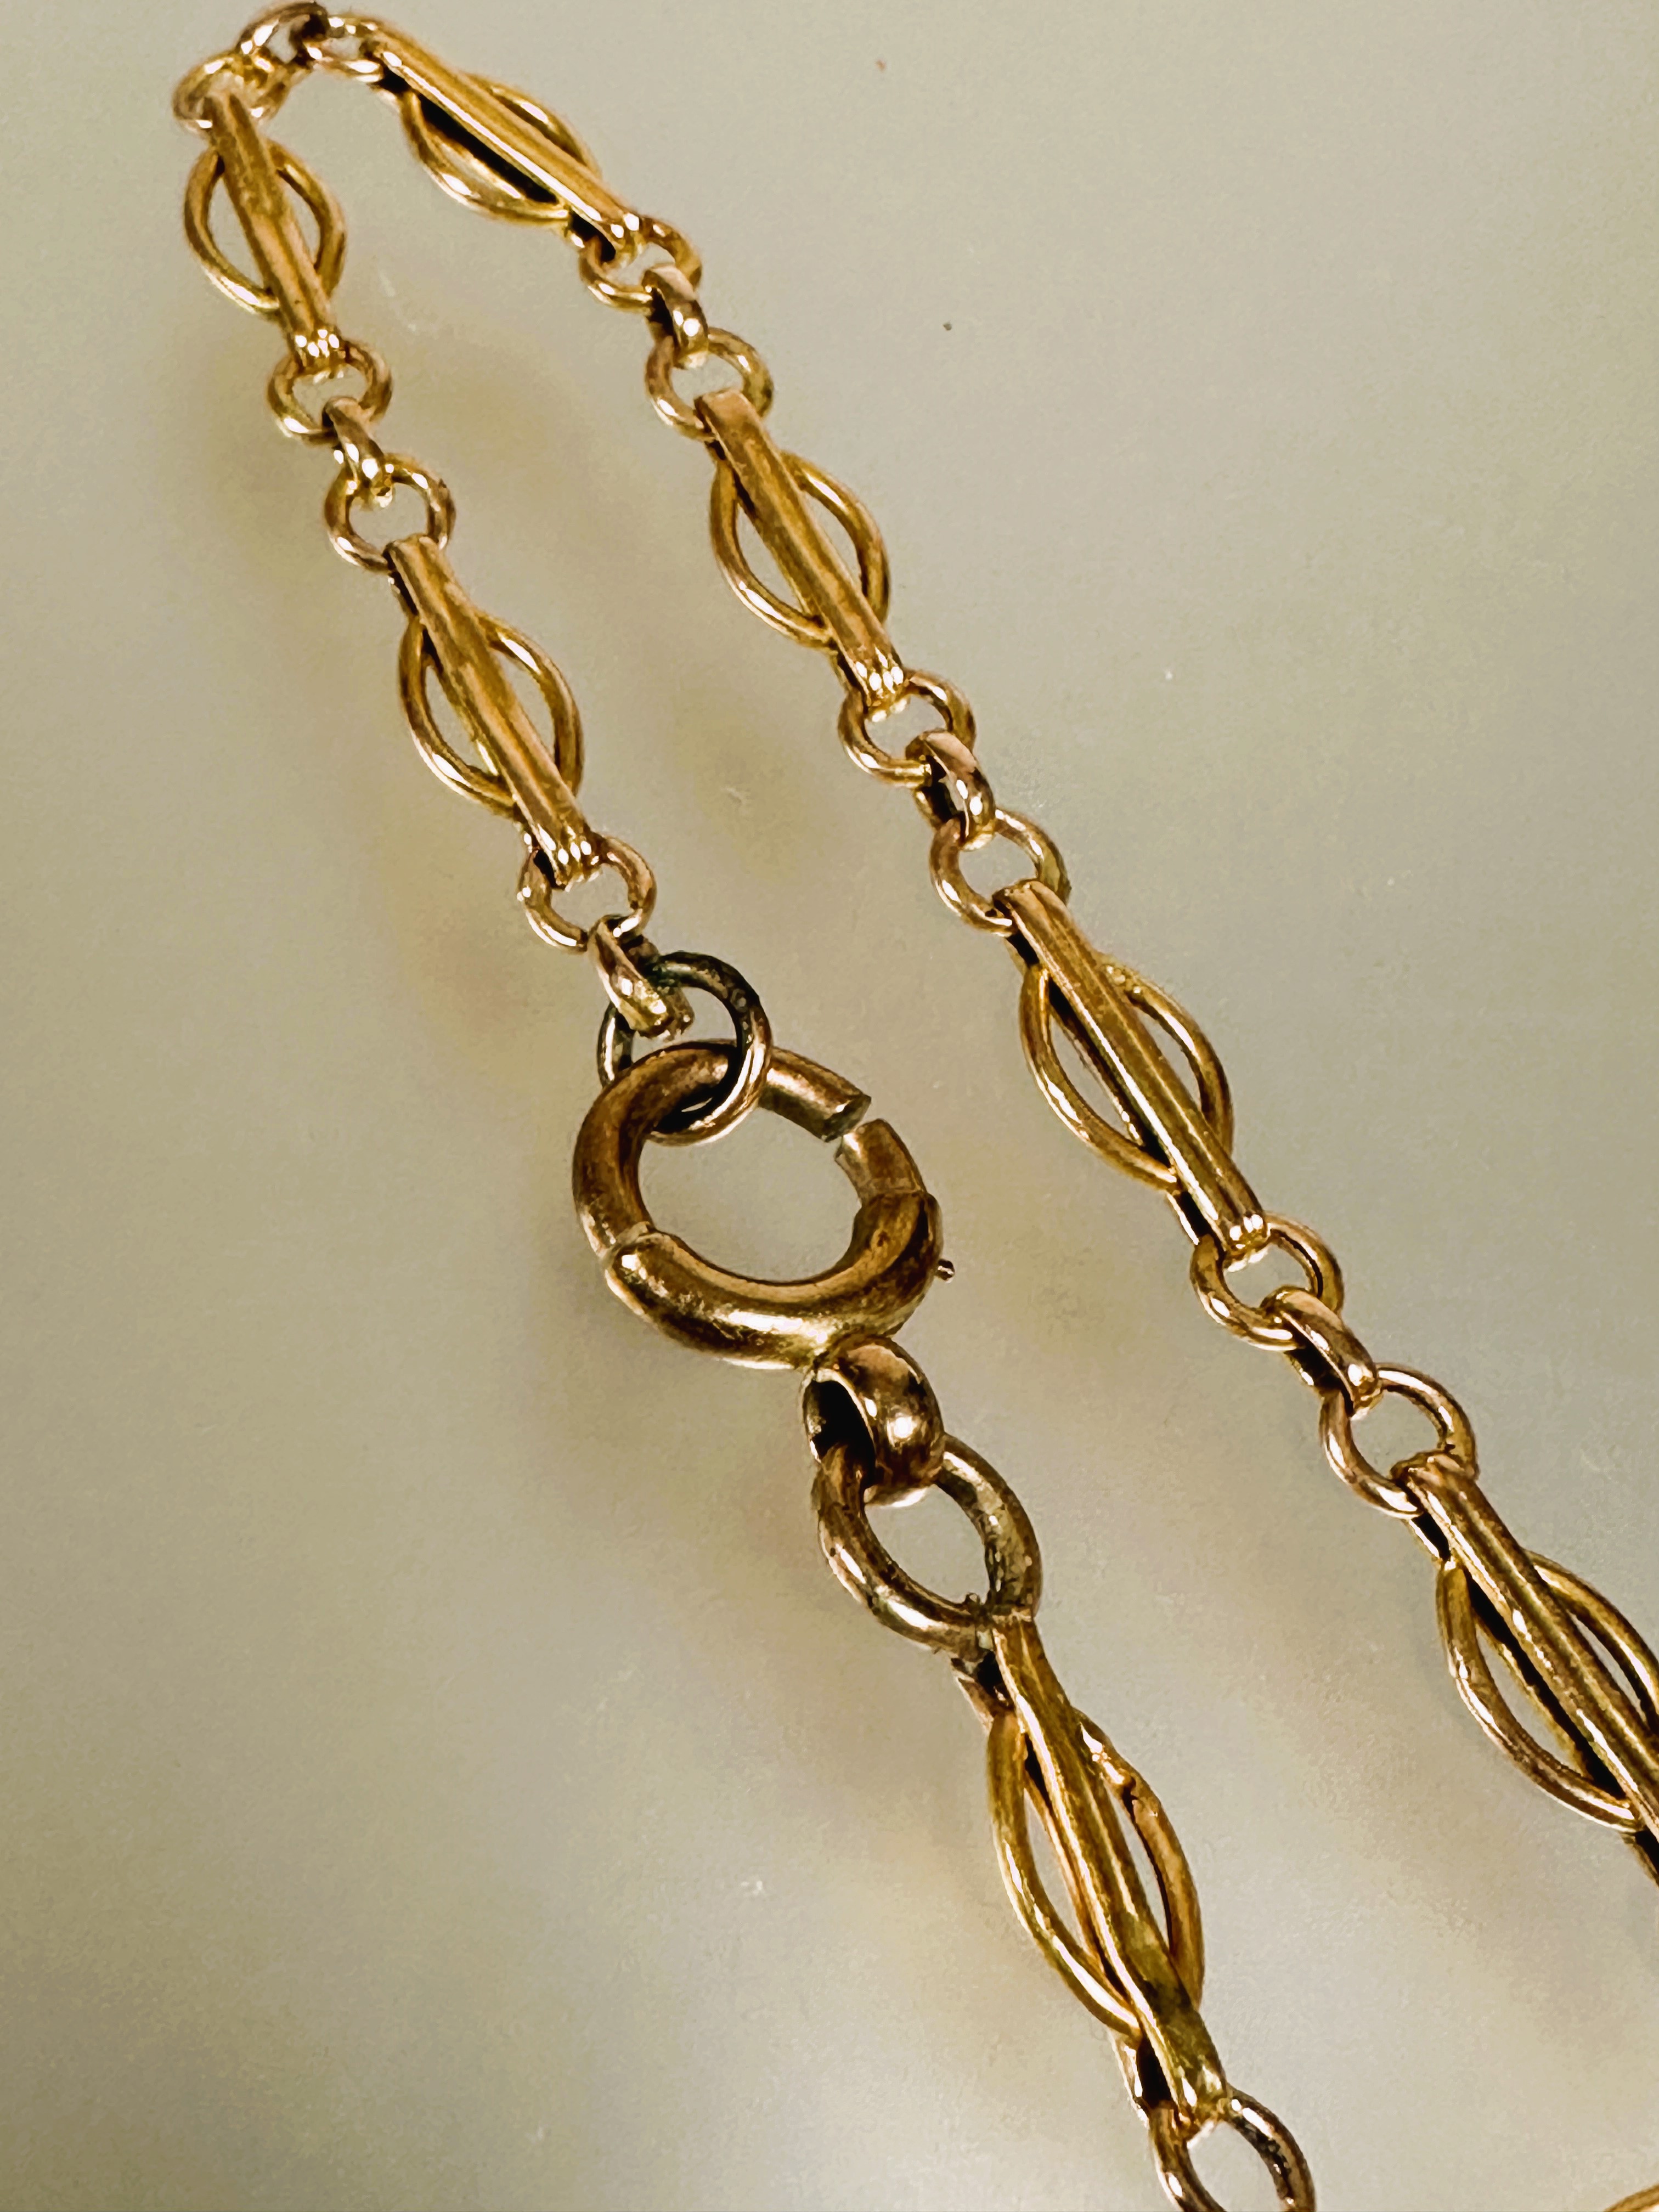 A 9ct gold oval bar and chain link bracelet with loop clasp fastening D x 9cm 4.56g - Image 2 of 3